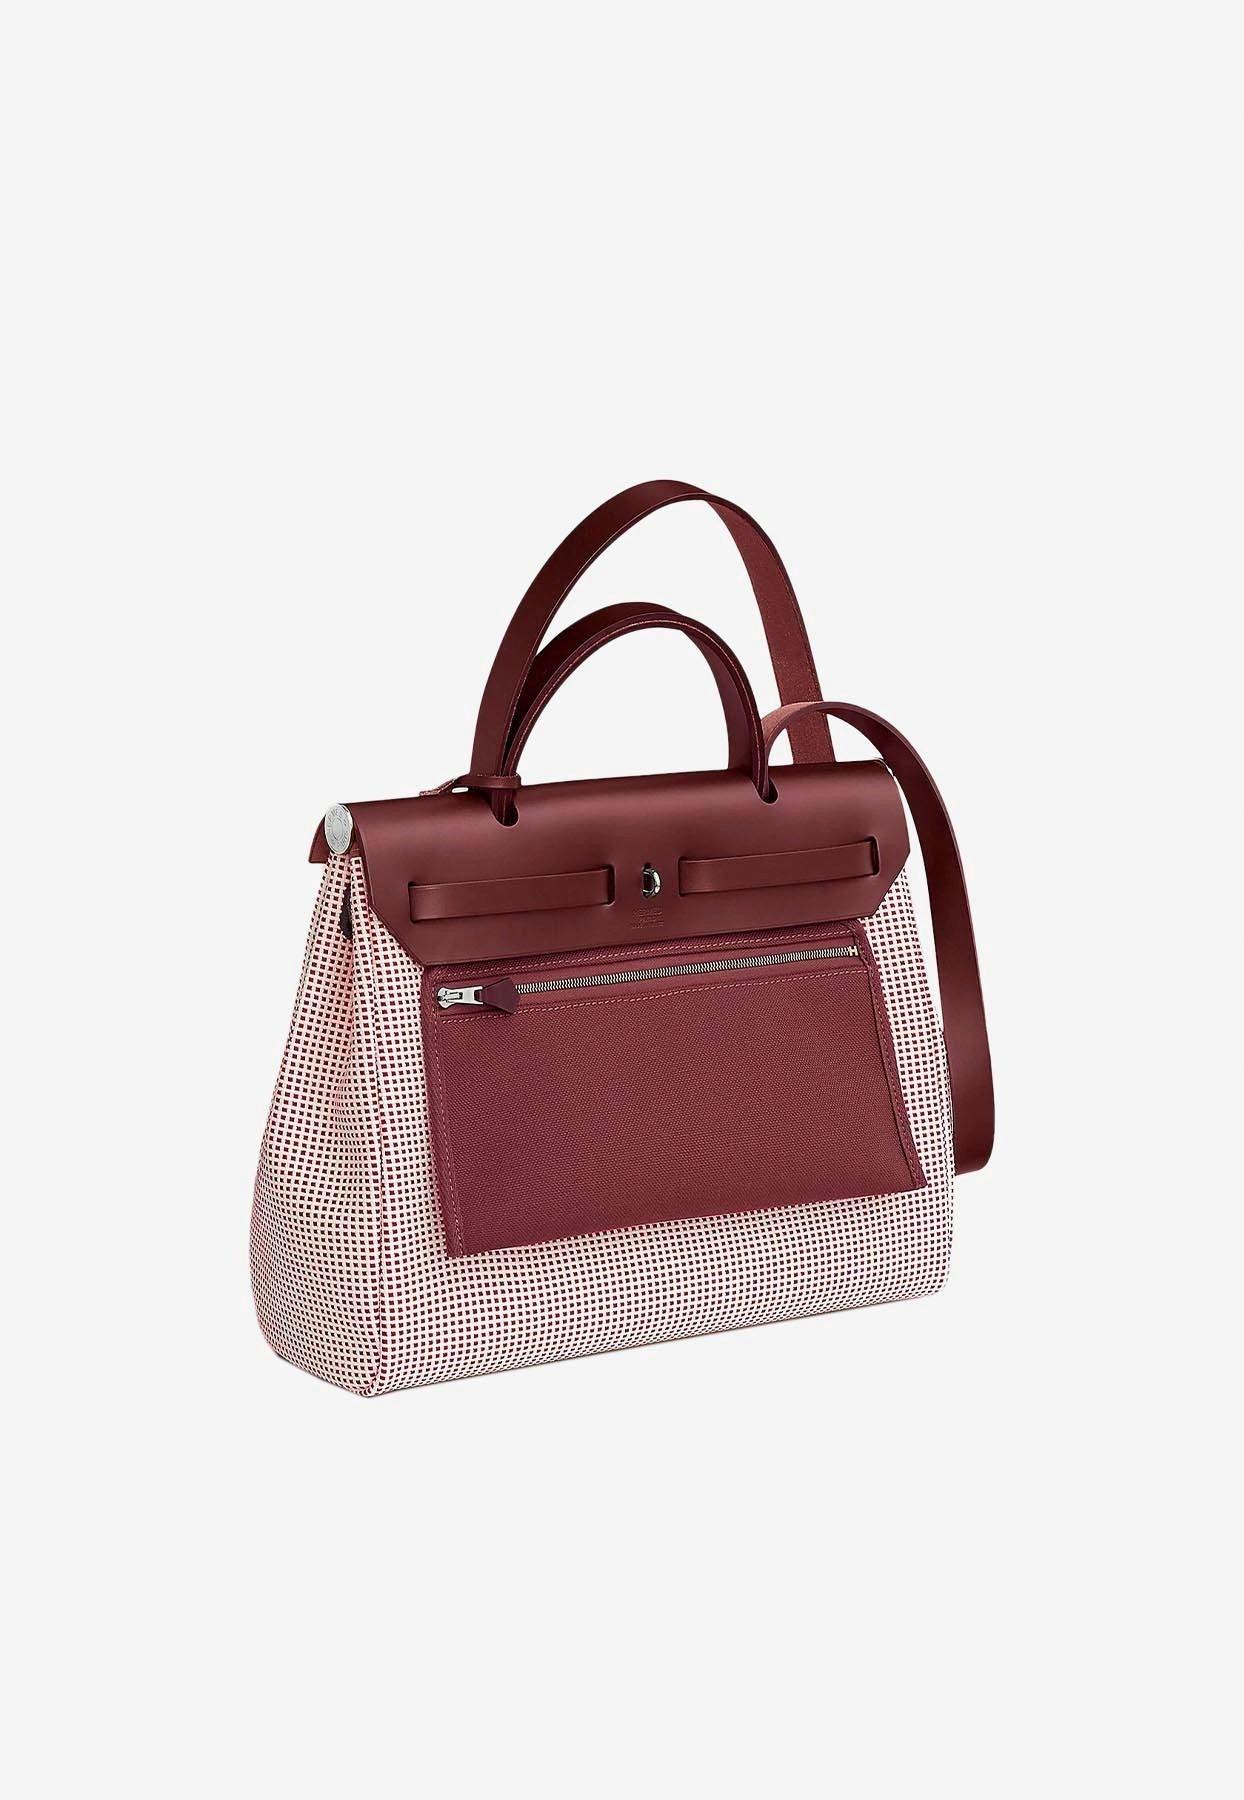 Hermes Herbag Zip H Vibration Toile and Leather 31